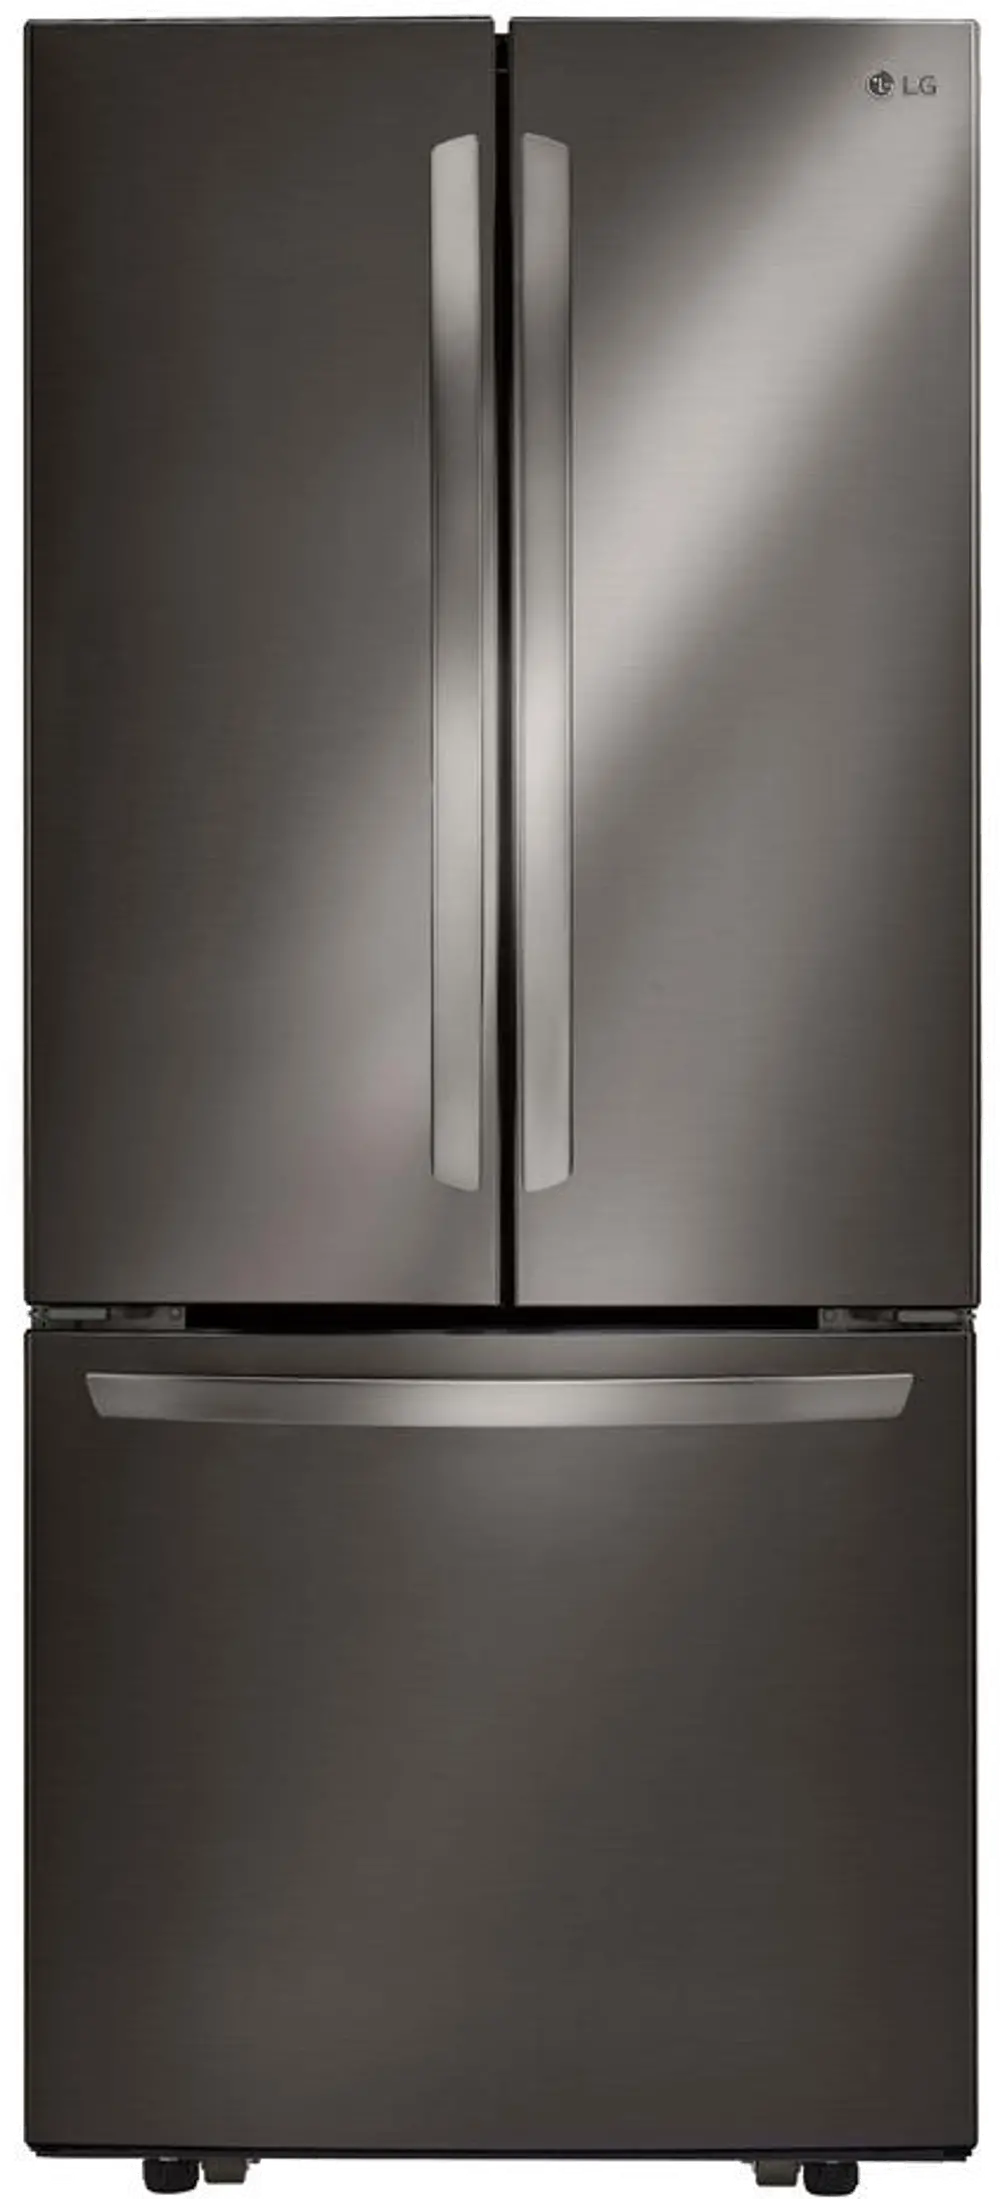 LFCS22520D LG 21.8 cu ft French Door Refrigerator - 30 W Black Stainless Steel-1